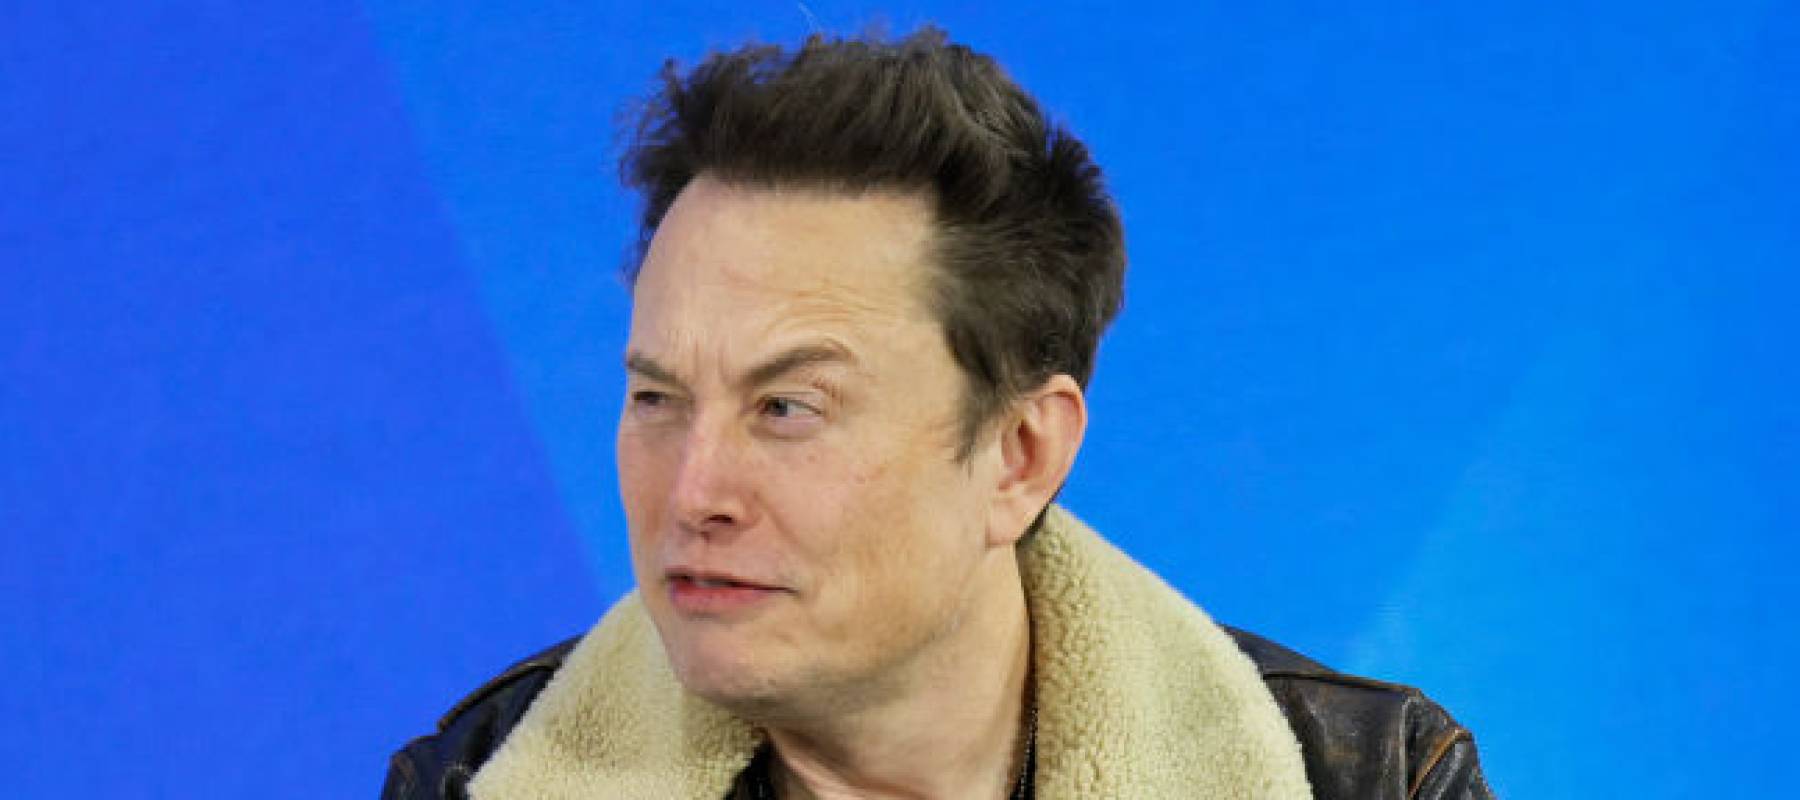 Elon Musk seen making a goofy face while on stage with a blue background.